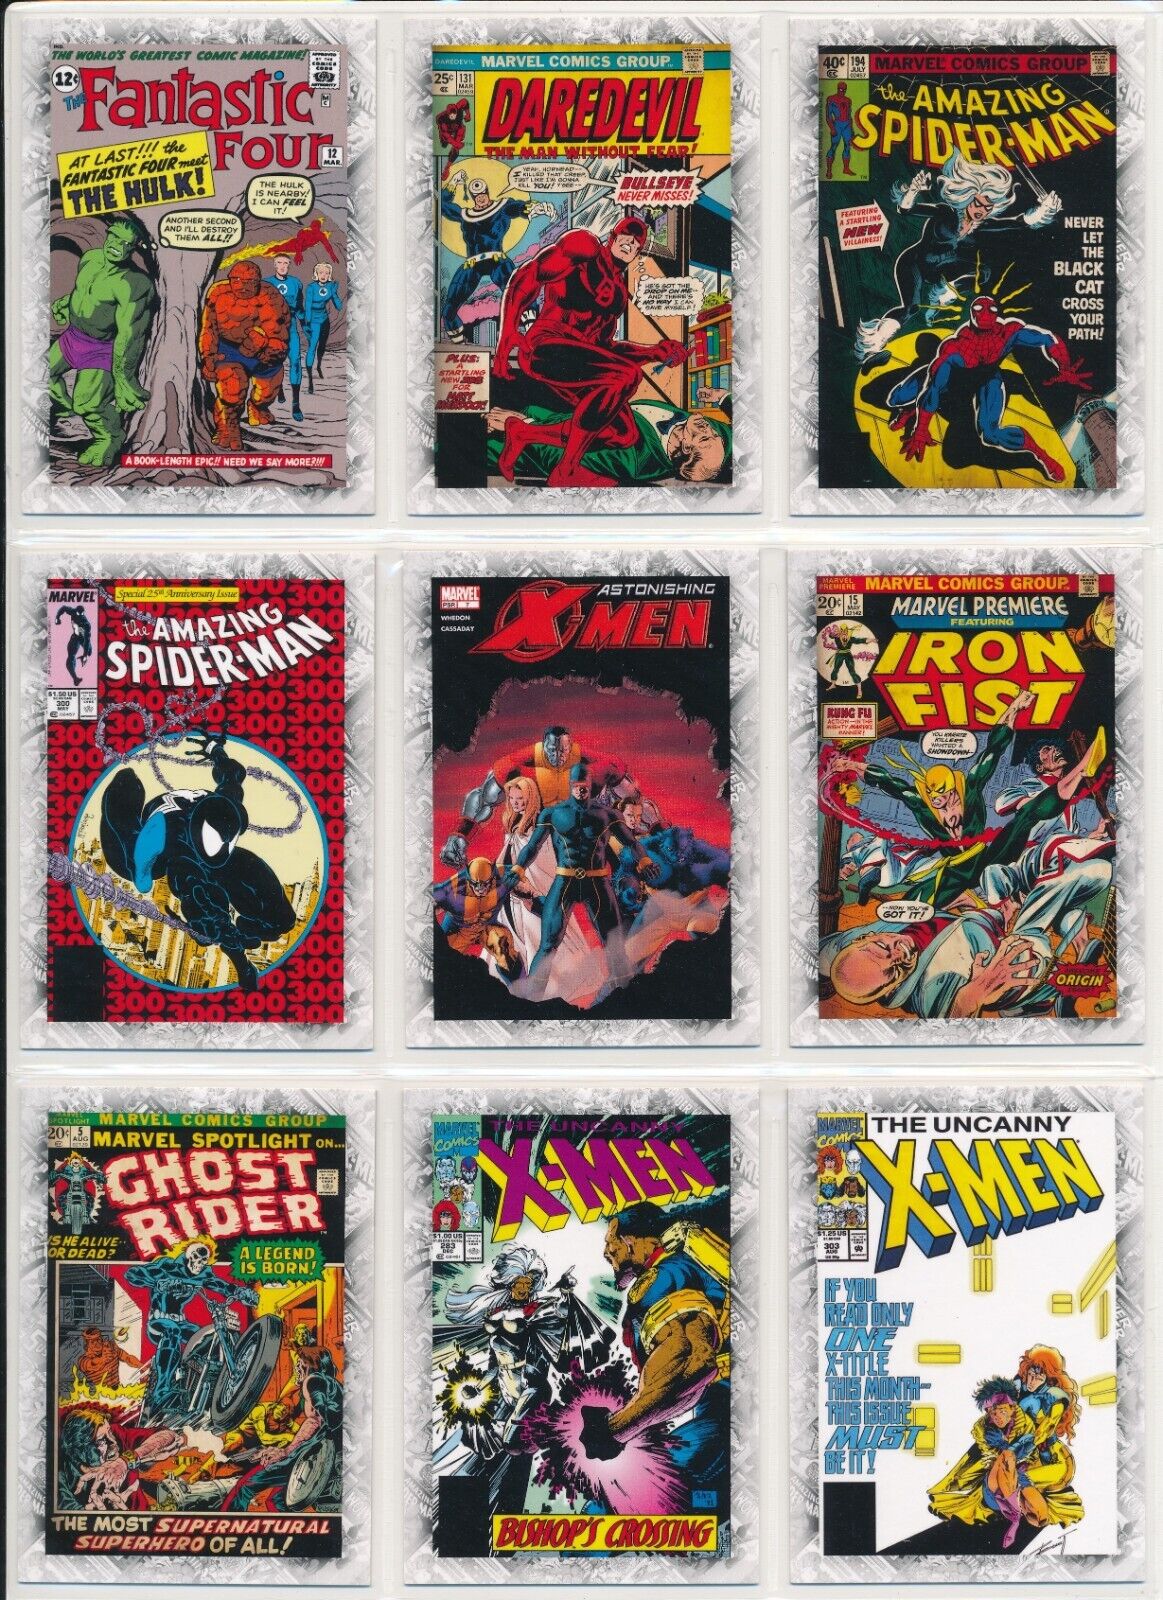 2012 Marvel Beginnings Breakthrough Issues Mixed Chase Card Lot of (9) Cards #4